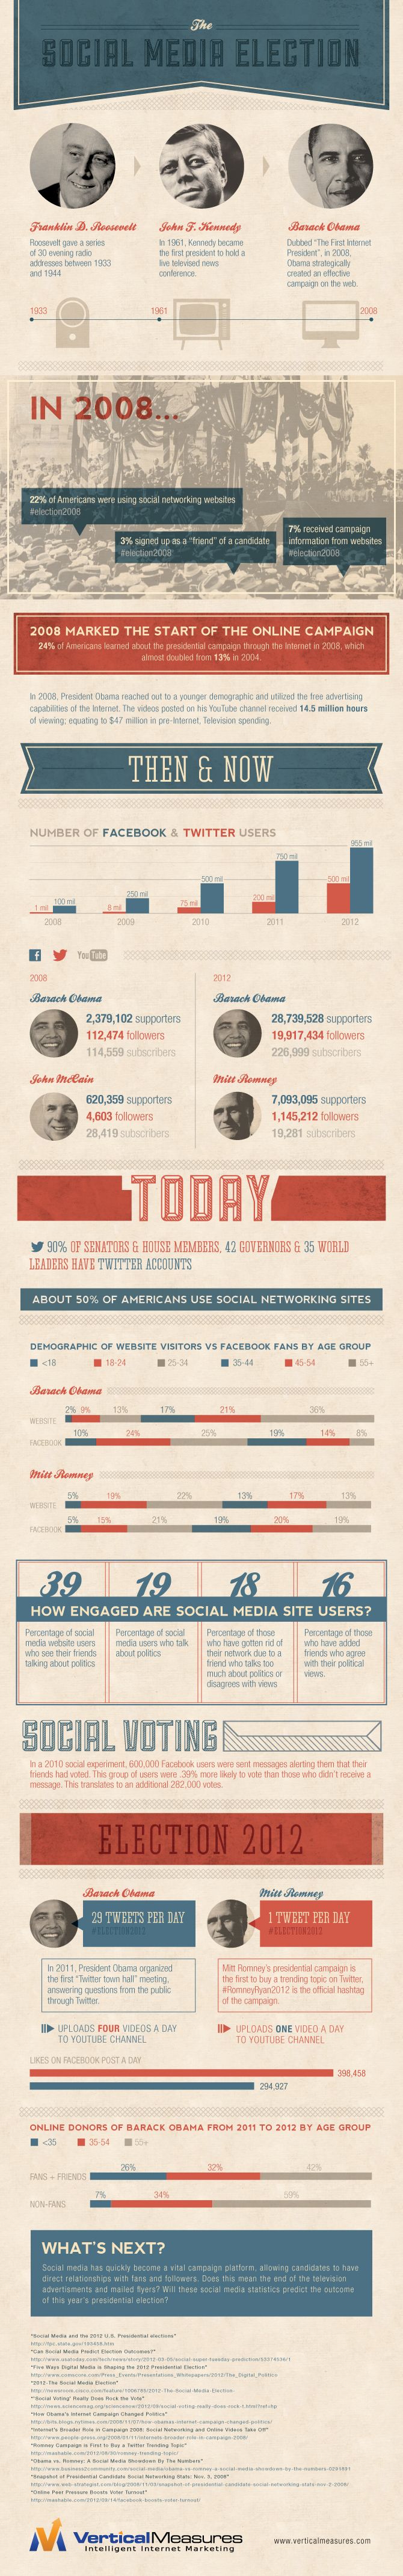 Infographic: The Social Media Election